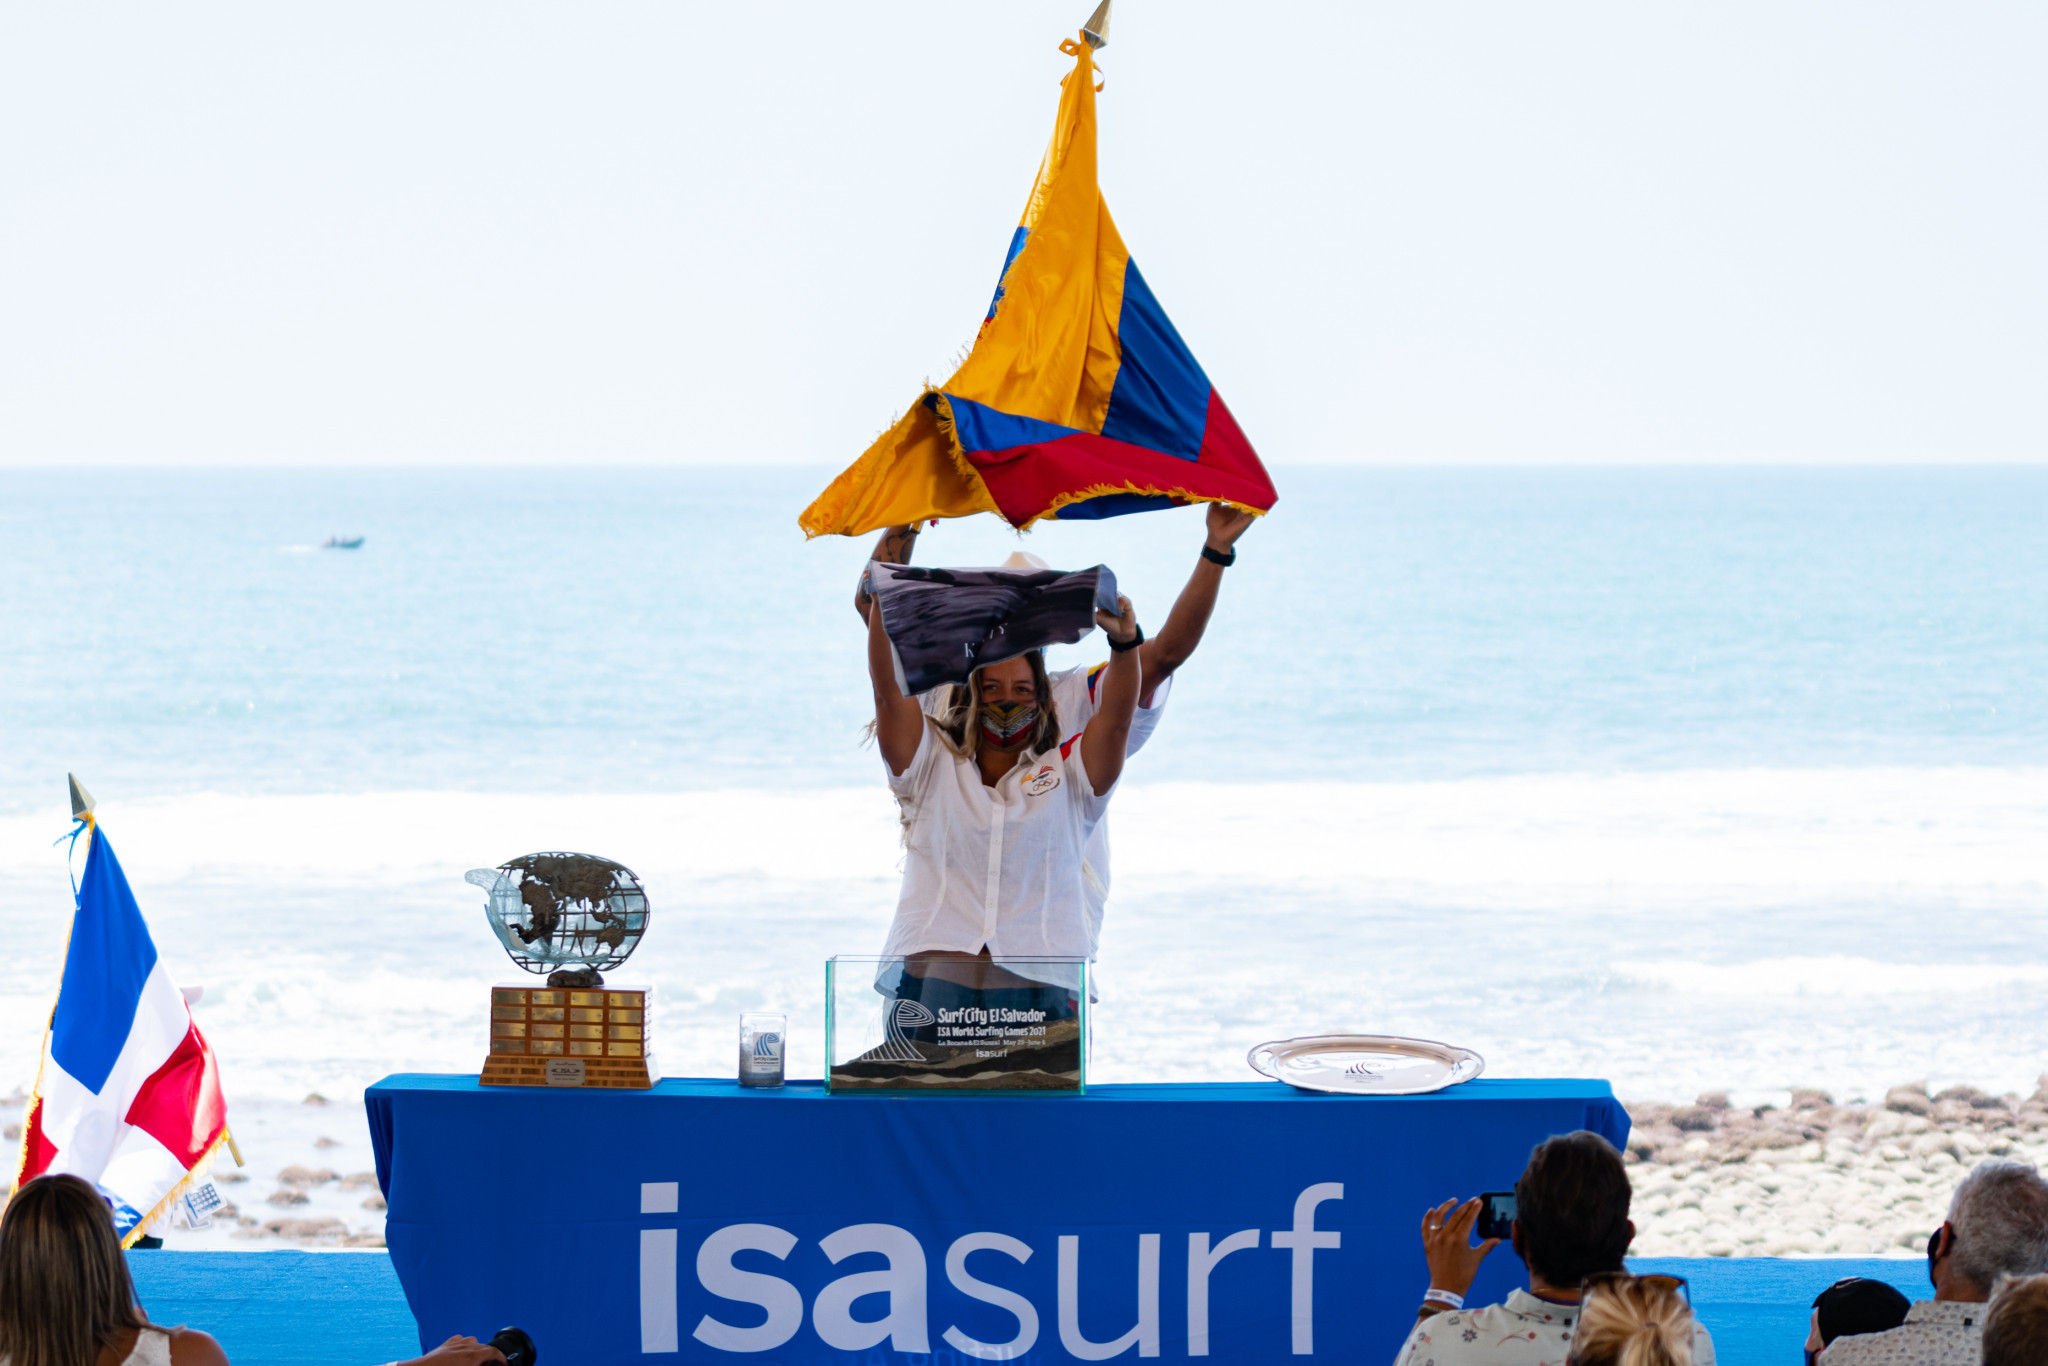 Ecuador's representatives are all smiles at the World Surfing Games Opening Ceremony ©ISA/Ben Reed